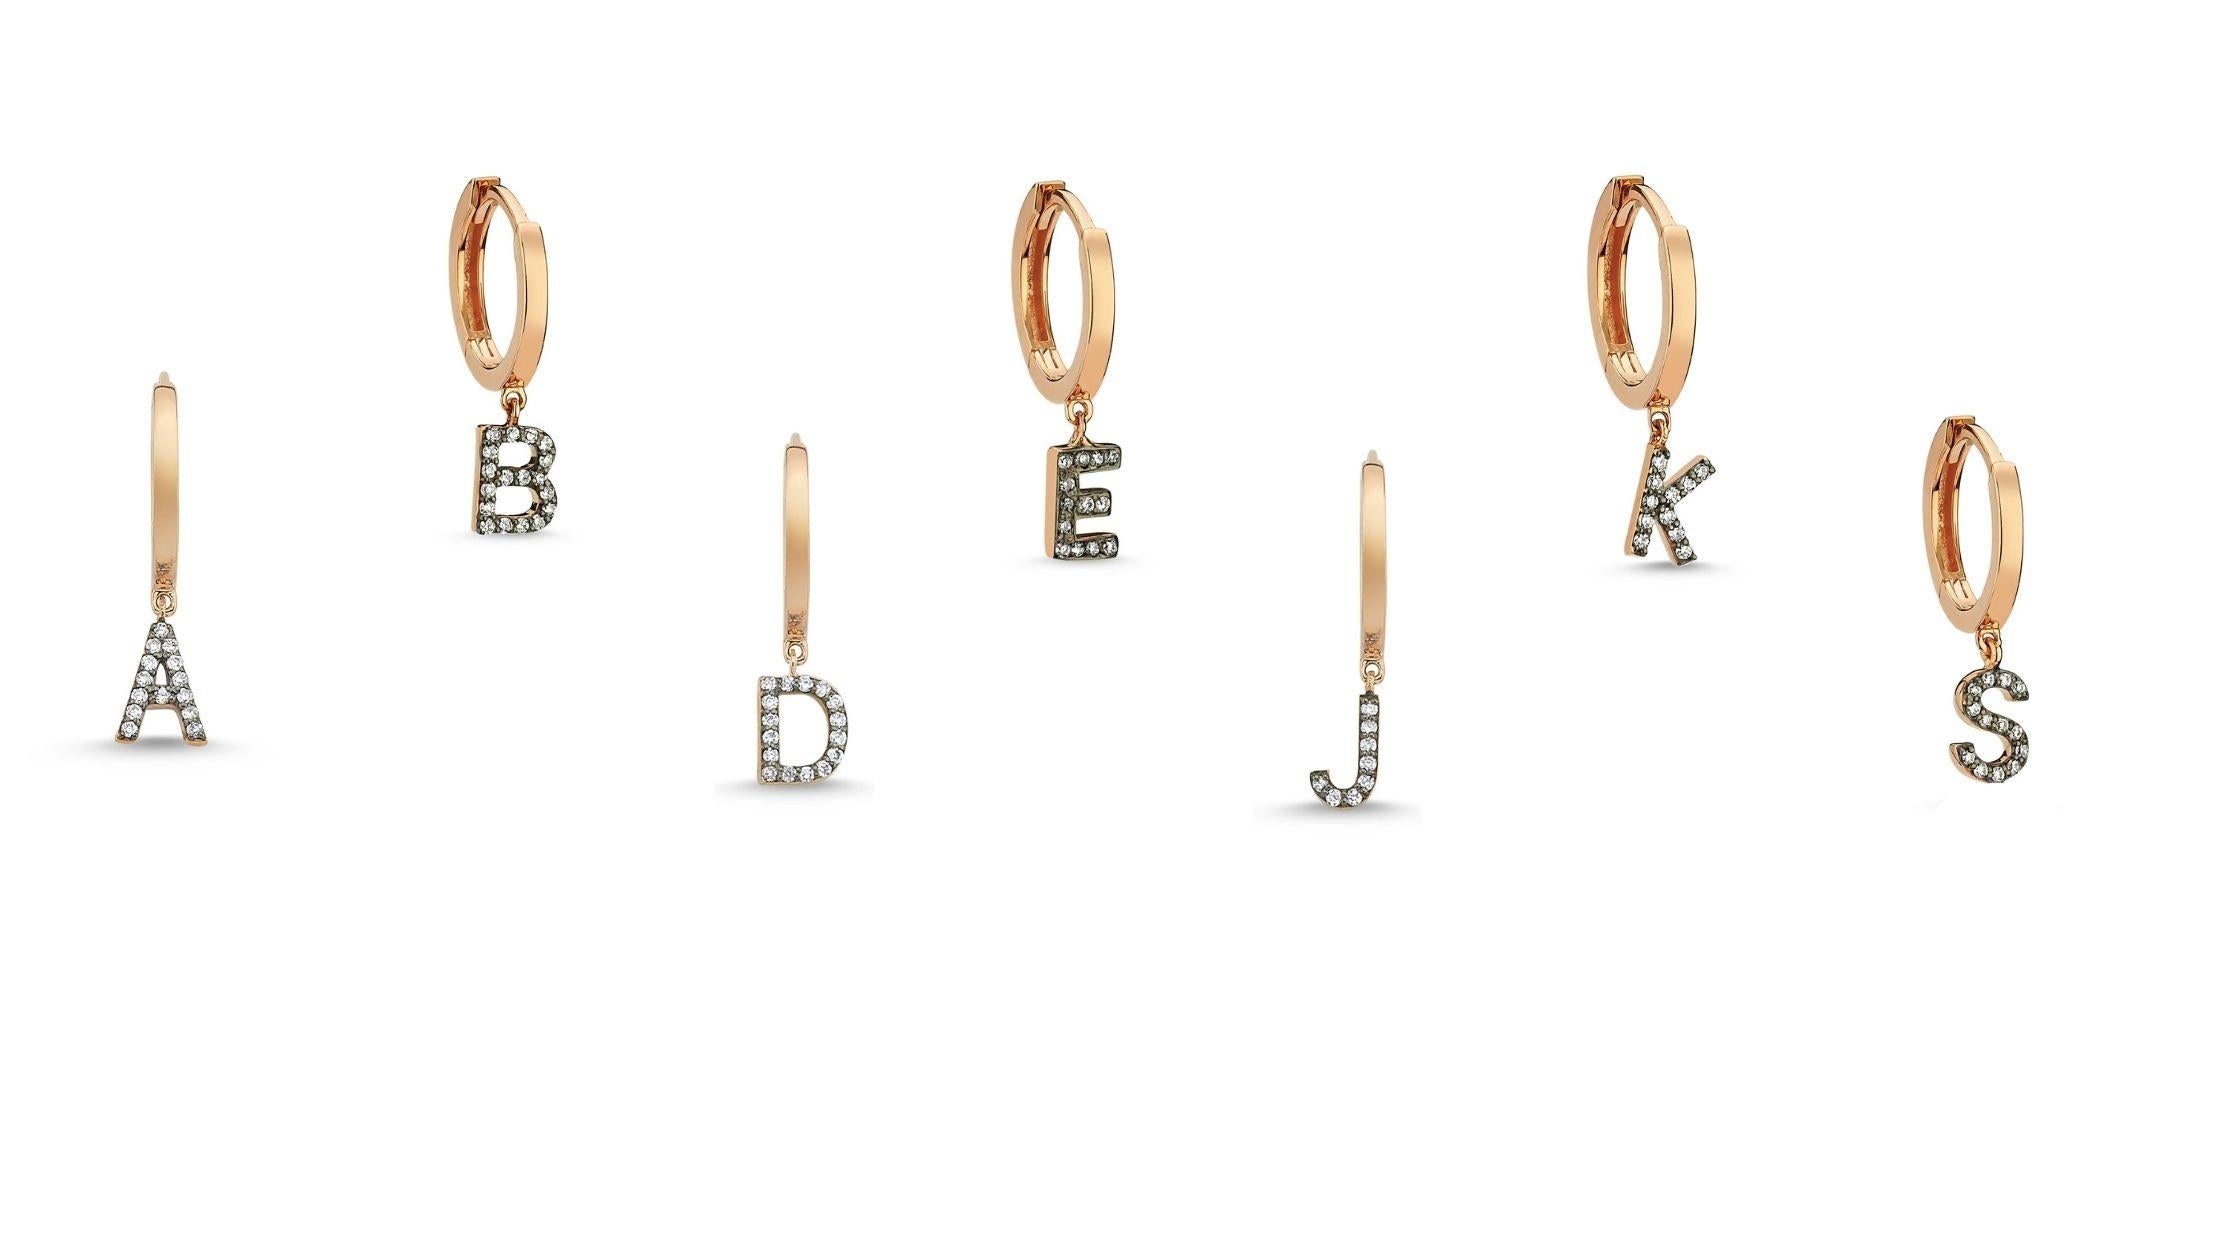 Letter C (single) 14k rose gold earring with white diamond by Selda Jewellery

Additional Information:-
Collection: Letter Collection
14k Rose gold
0.04ct White diamond
Letter height 1cm